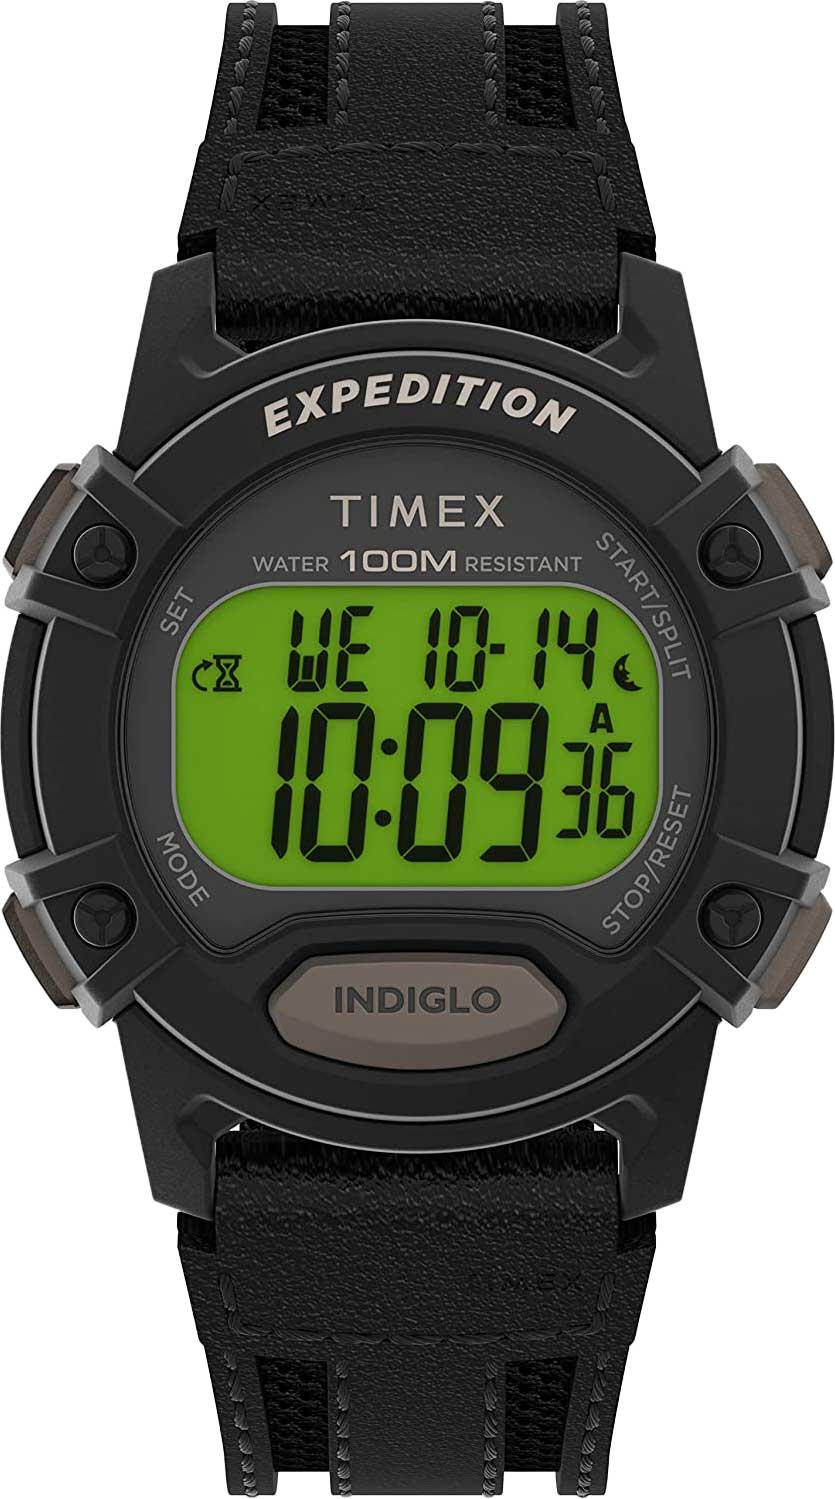   Timex Expedition TW4B25200  